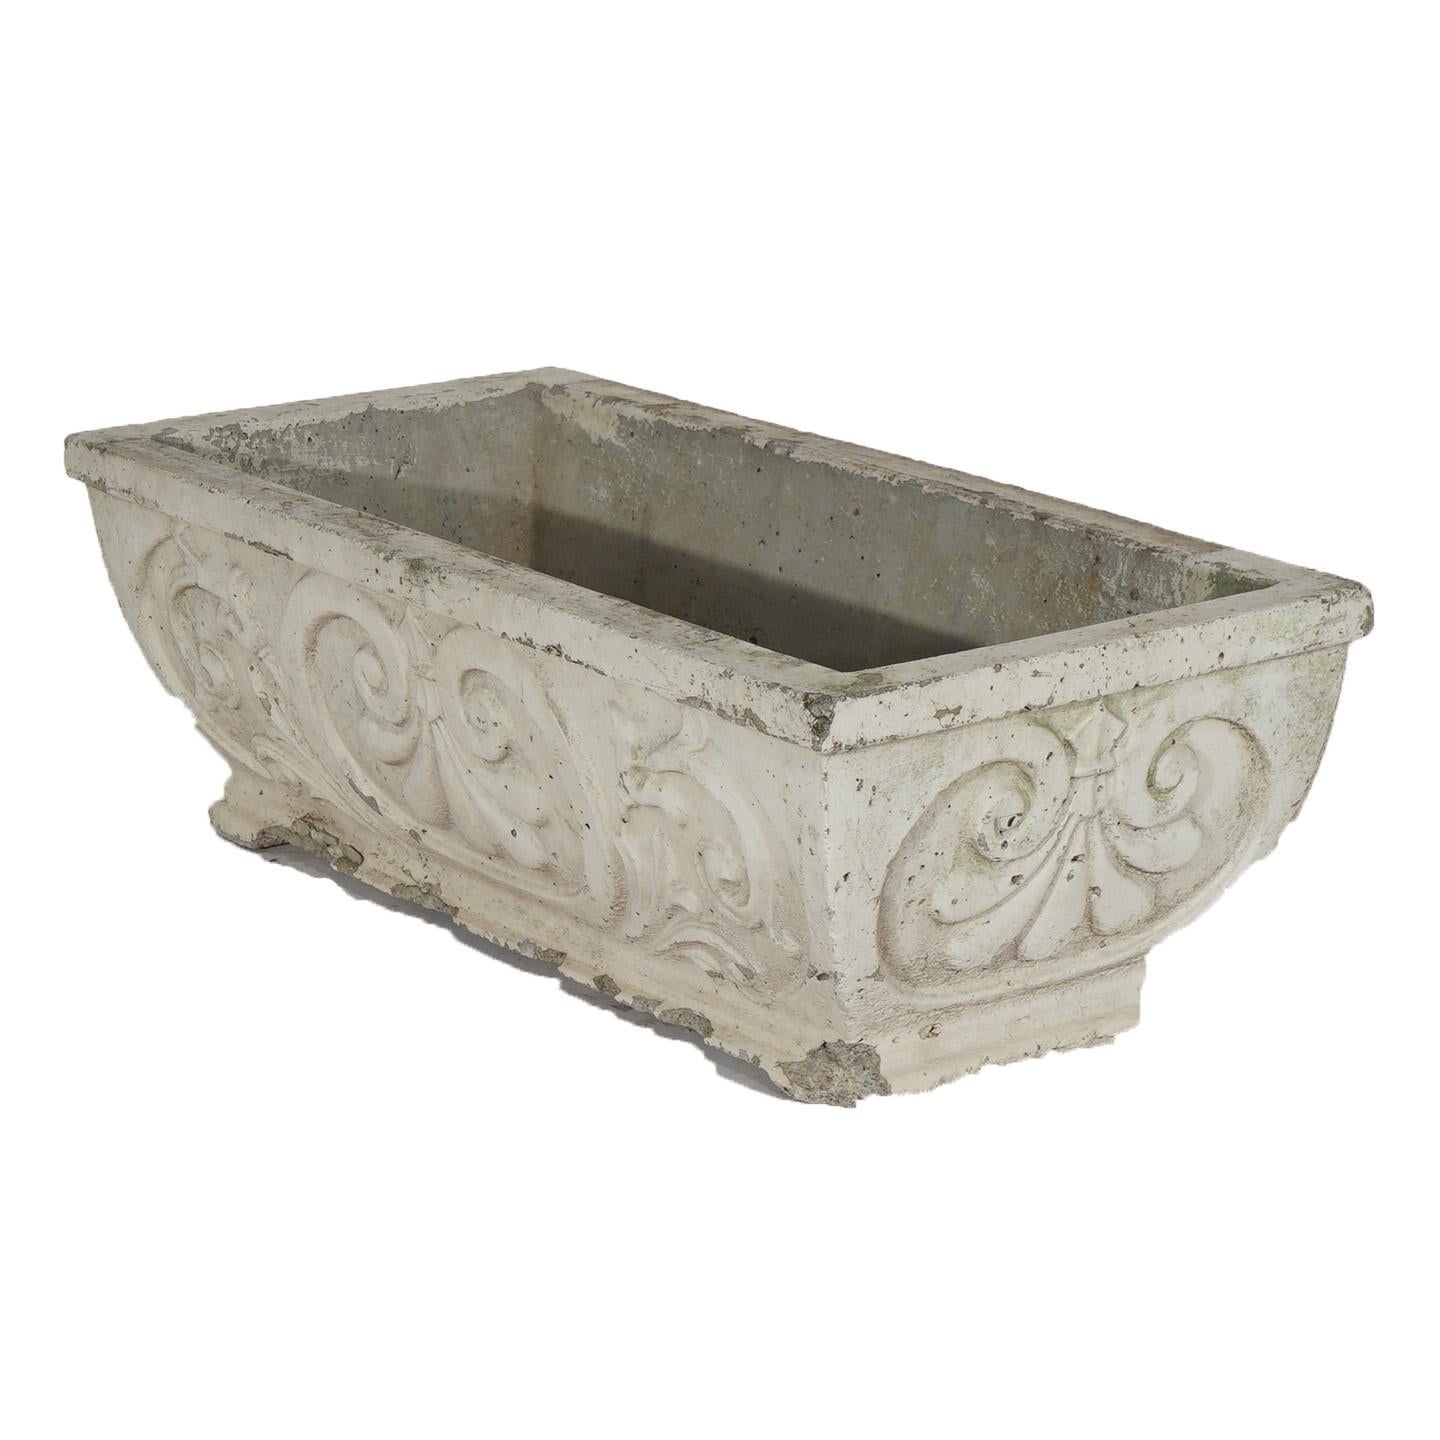 Cast Stone Cast Hardstone Long Garden or Patio Planter with Scroll Work in Relief 20th C For Sale